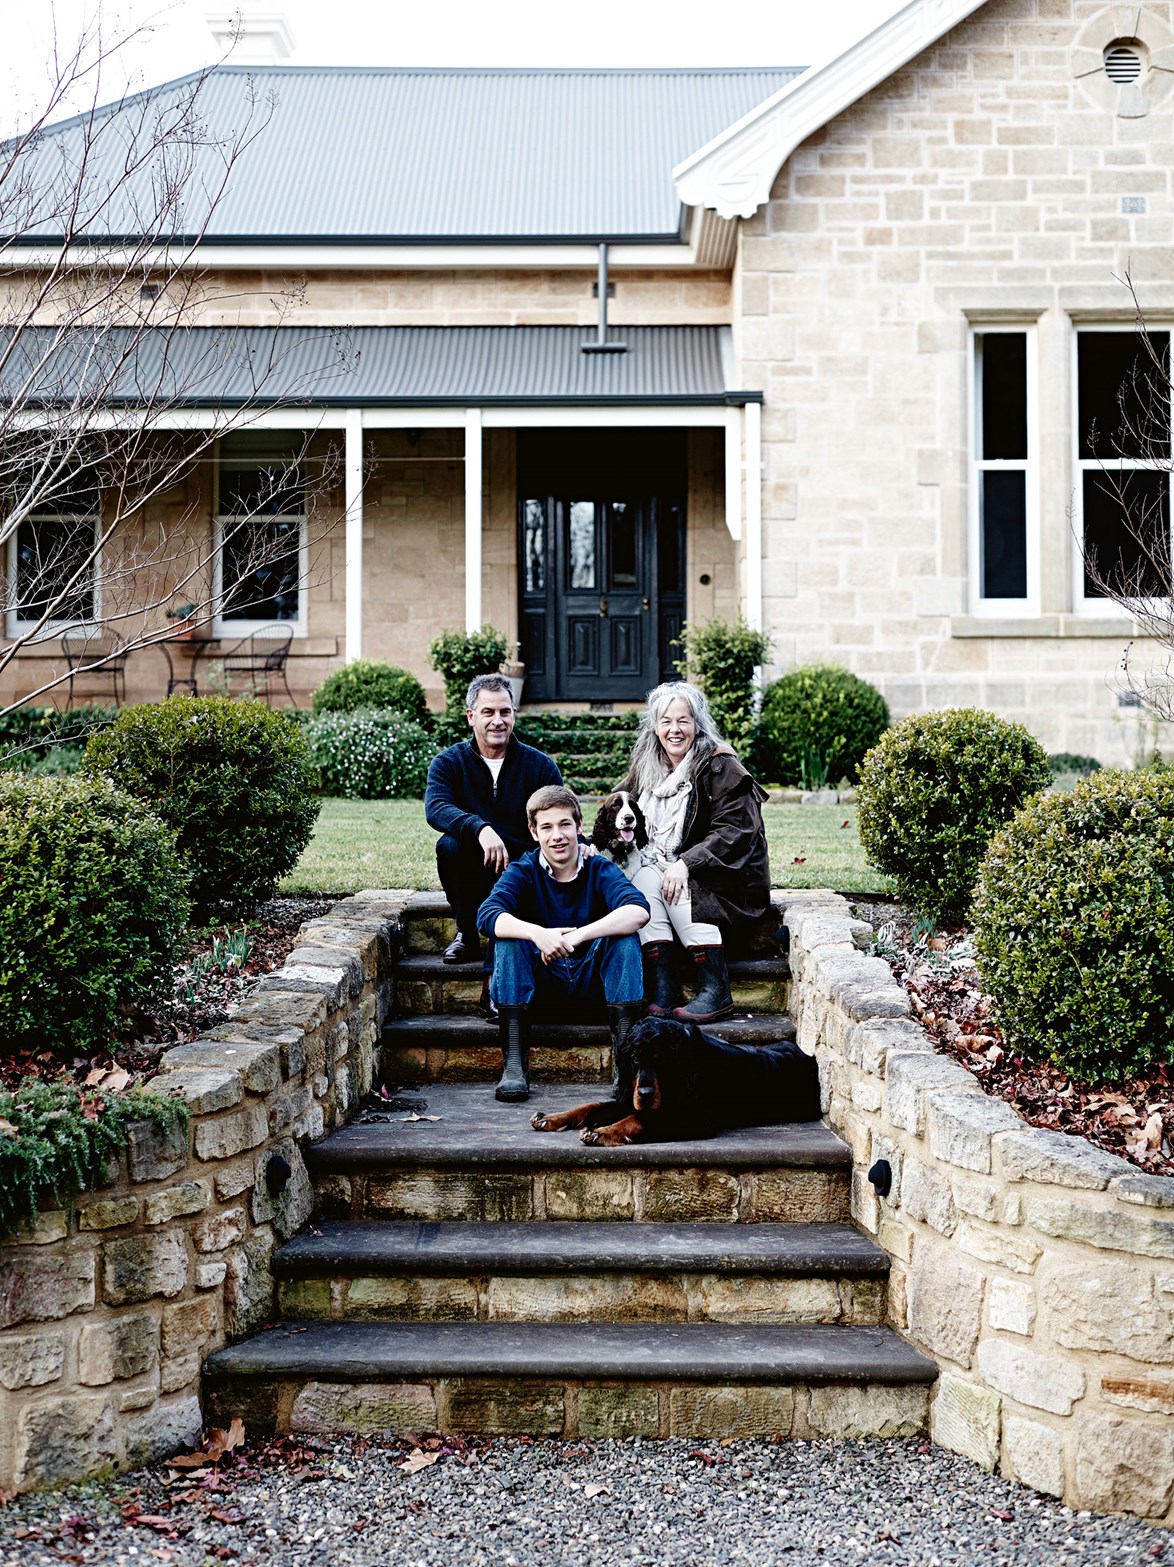 A 12-month renovation of this [classic homestead](https://www.homestolove.com.au/classic-contemporary-homestead-13411|target="_blank") saw Jane McLaren and her family 'camped' in the house with few comforts. "We did everything to the house you could think of. It needed reroofing, replastering, wiring, replacing windows – and the verandah posts had to be redone," she says.